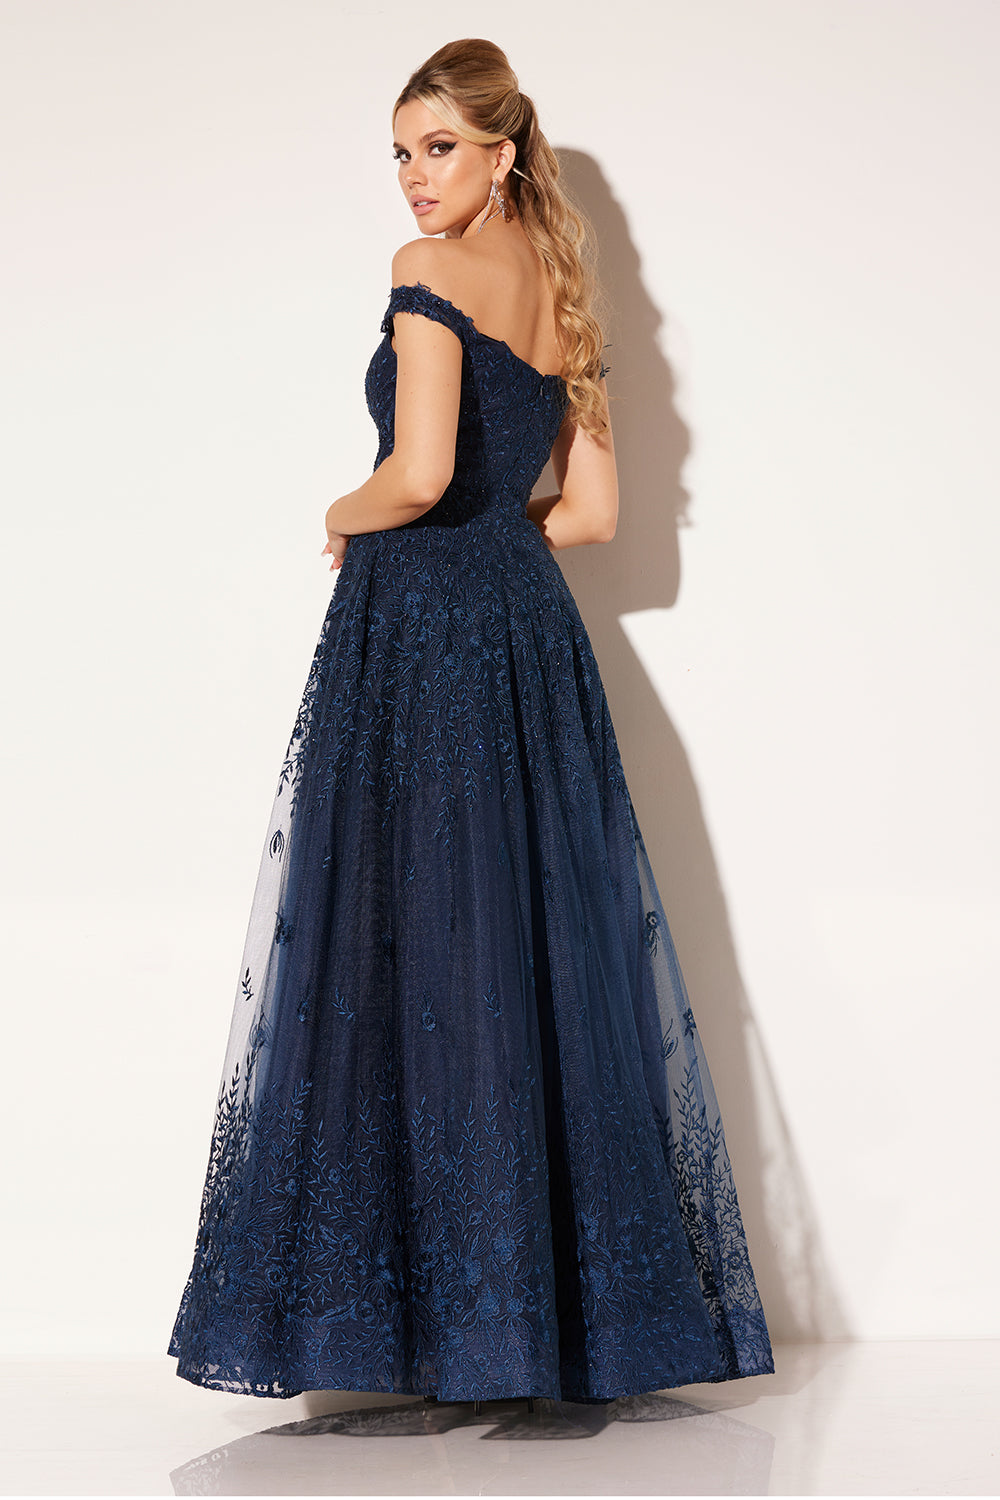 Lucci-Lu-C8090-Deep-V-Neckline-Open-Back-Embroidered-Tulle-A-Line-Navy-Evening-Dress-B-Chic-Fashions-Prom-Dress